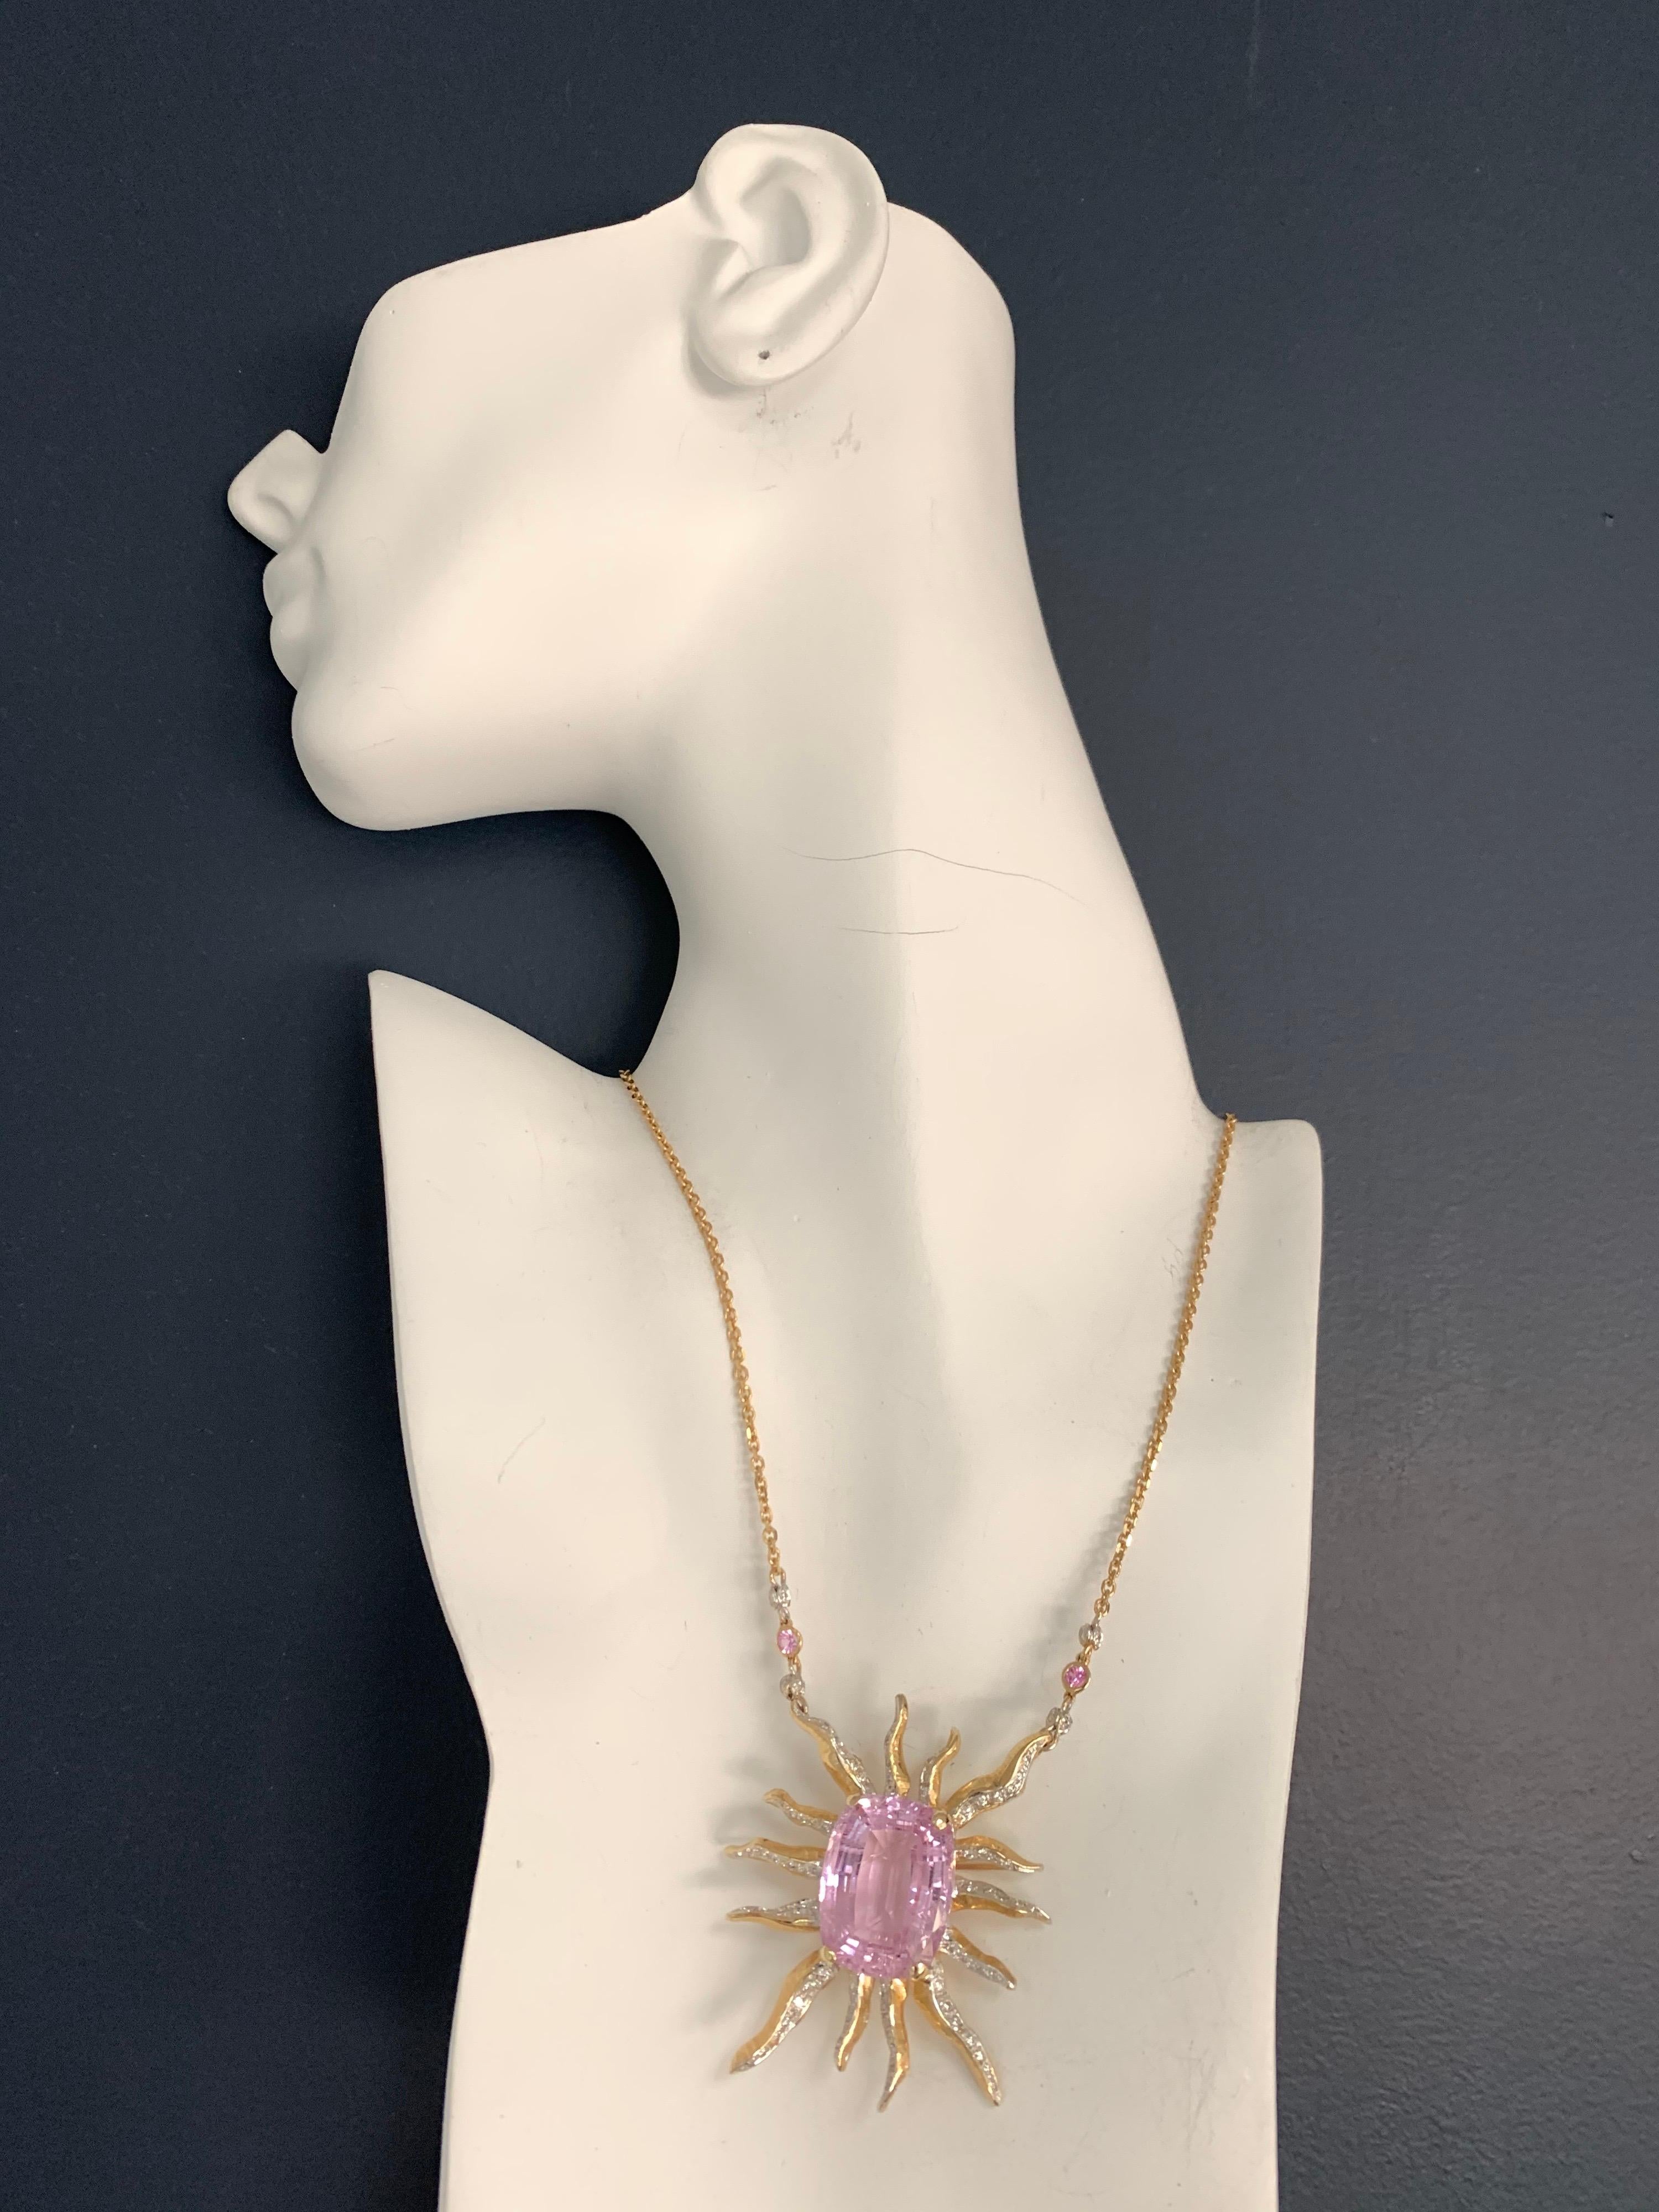 A Stunning 14k Gold Starburst Pendant set with an approximately 30 carat cushion shaped purplish pink Natural Kunzite measuring 23x18x11.2mm.

The piece is also set with 95 round brilliant diamonds weighing approximately 0.85 carats, G-H in color